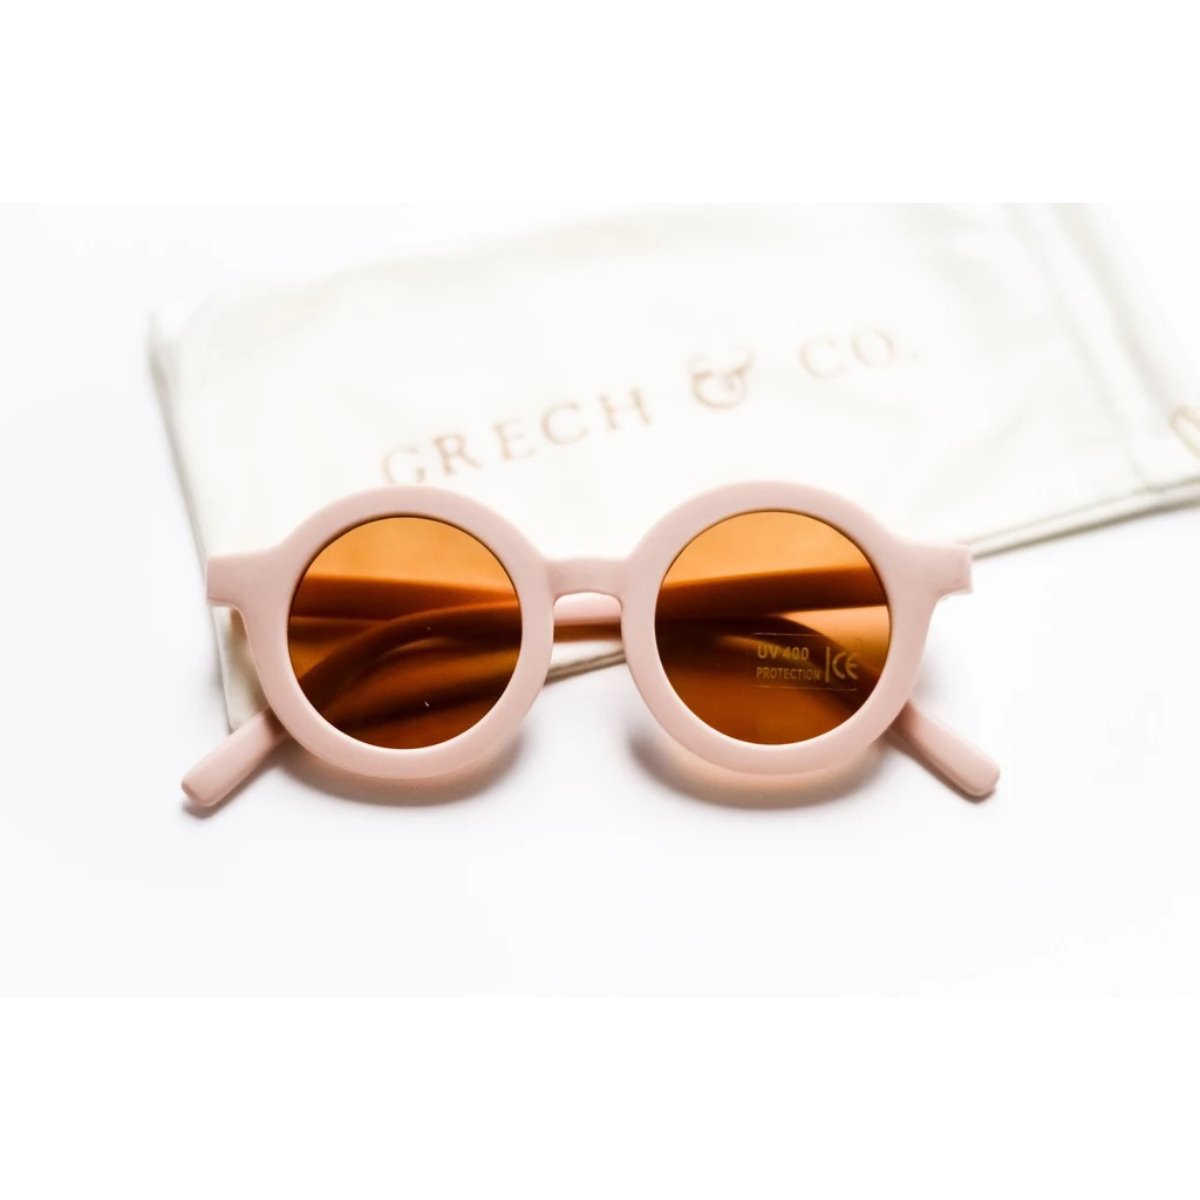 20ss/SUSTAINABLE KIDS SUNGLASSES -01 SHELL